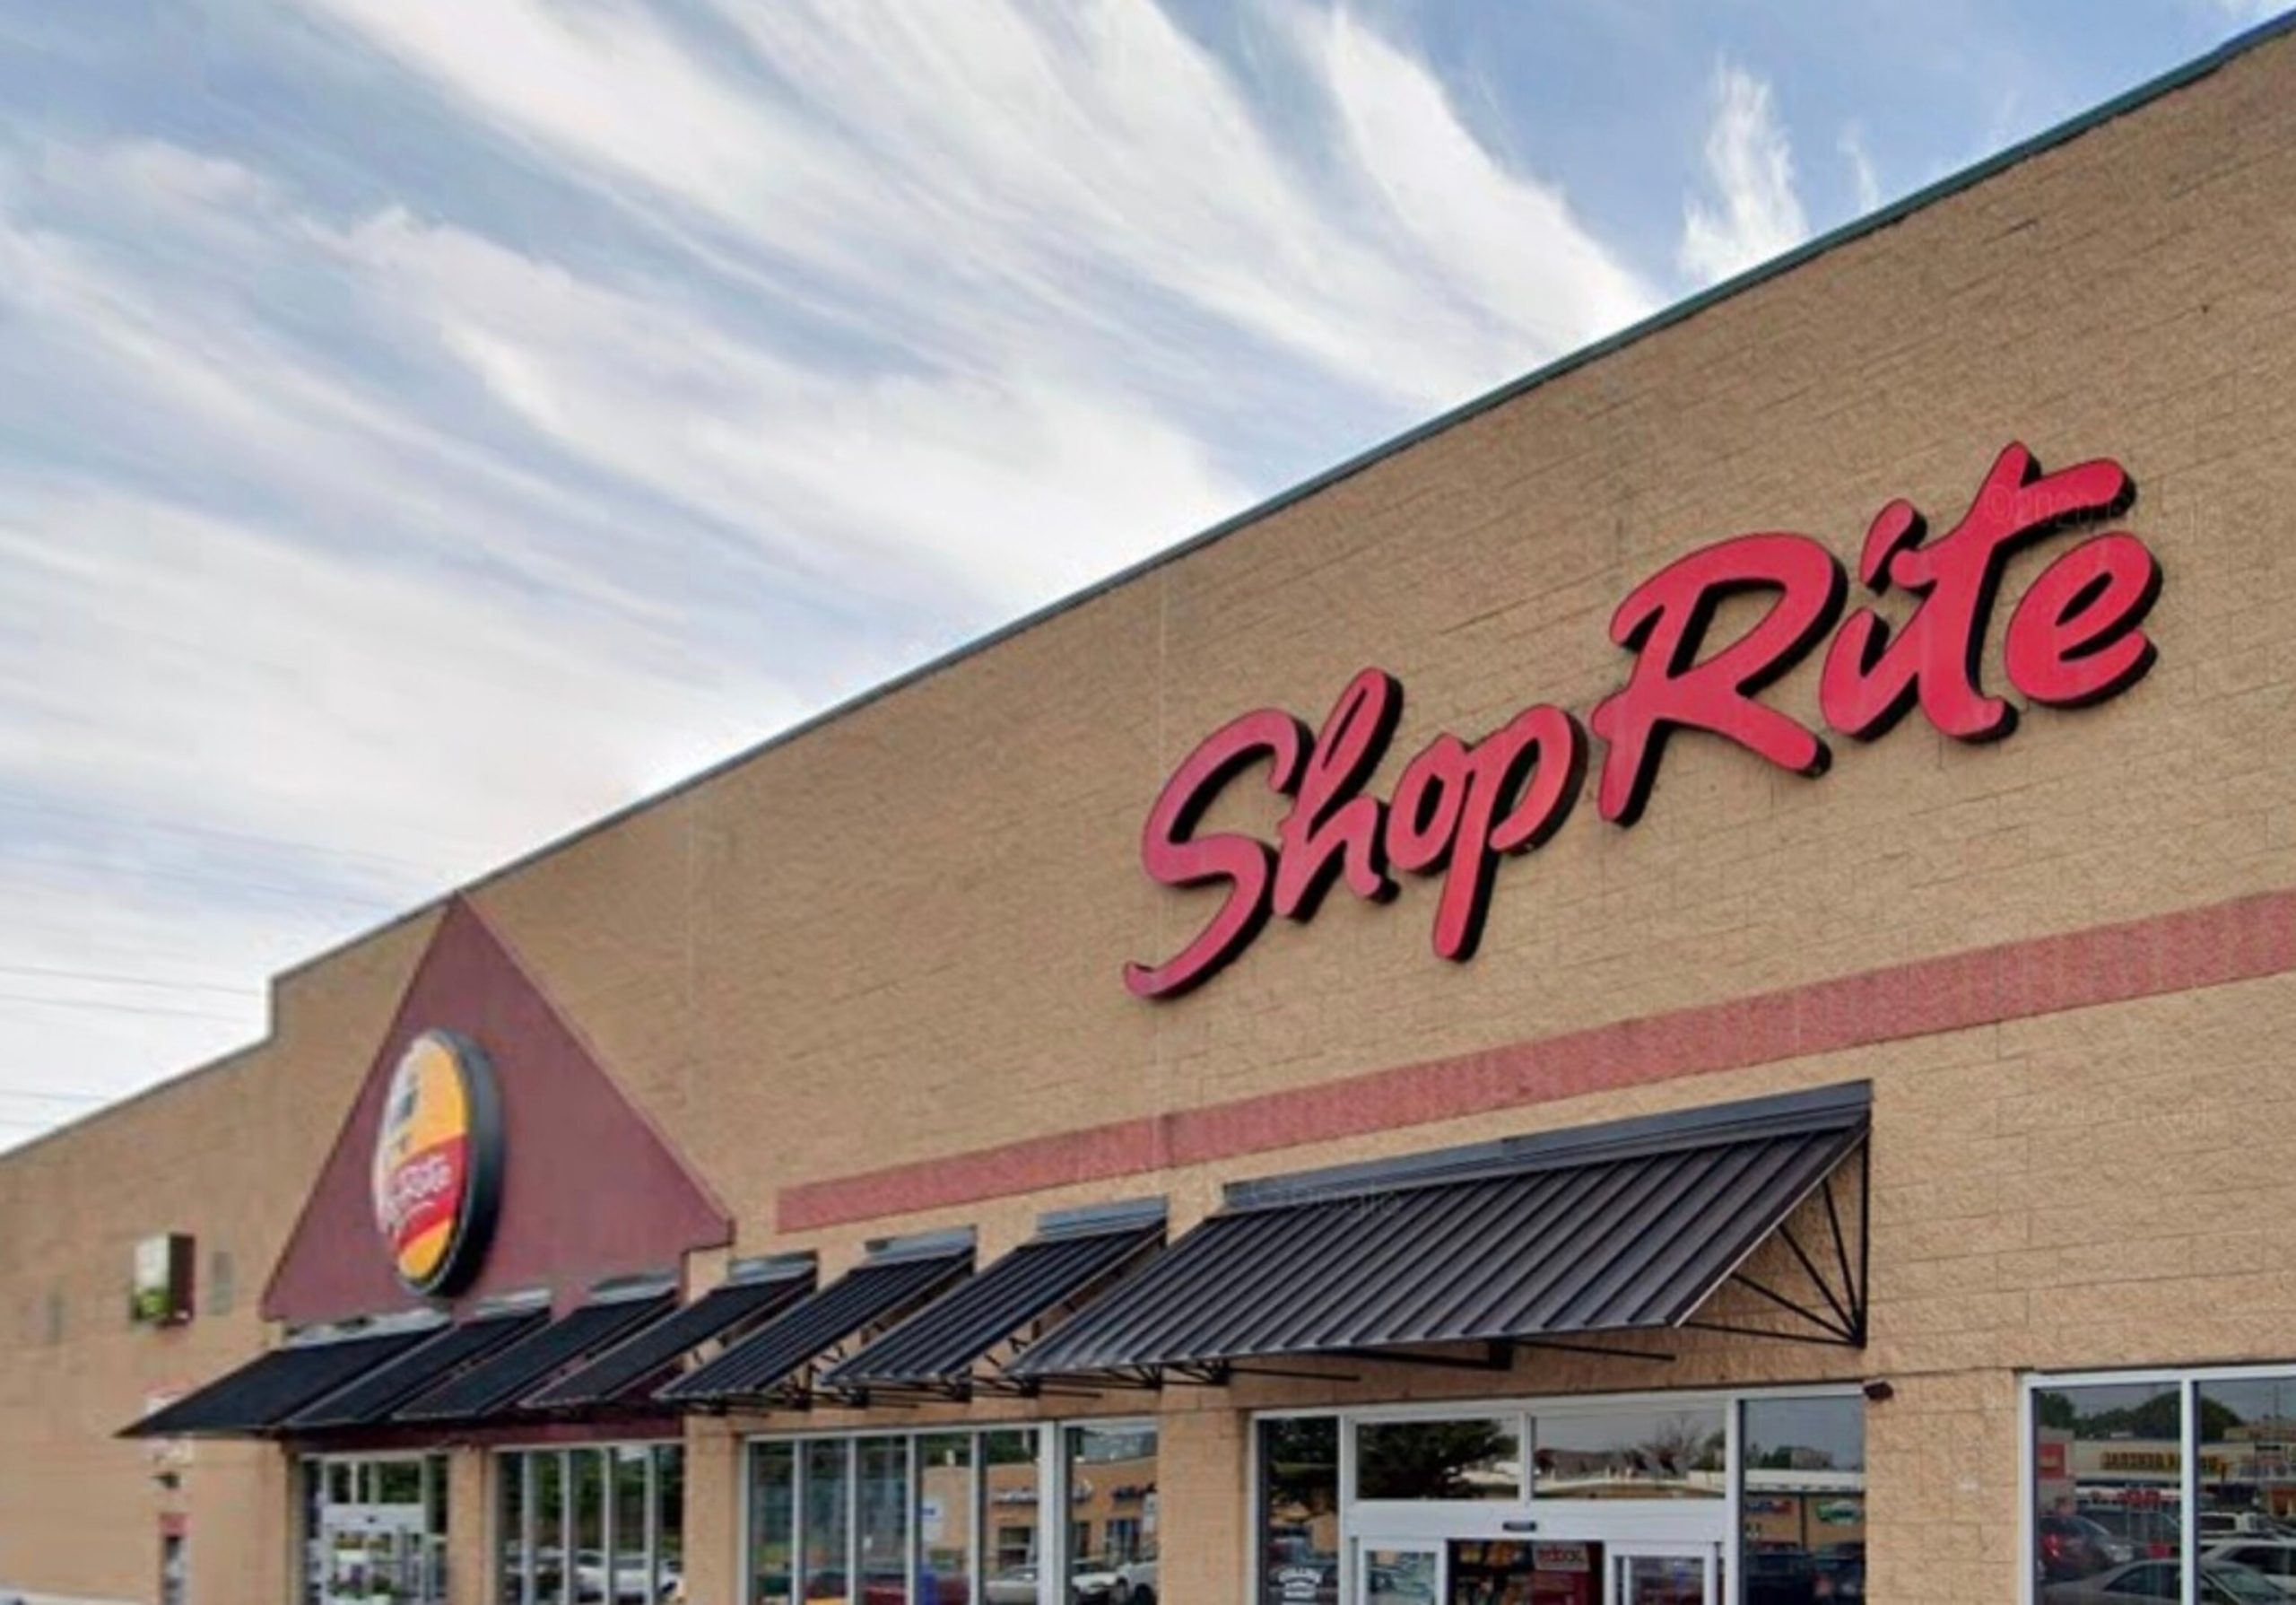 Health officials issue warning about potential hepatitis A exposure at Philadelphia ShopRite